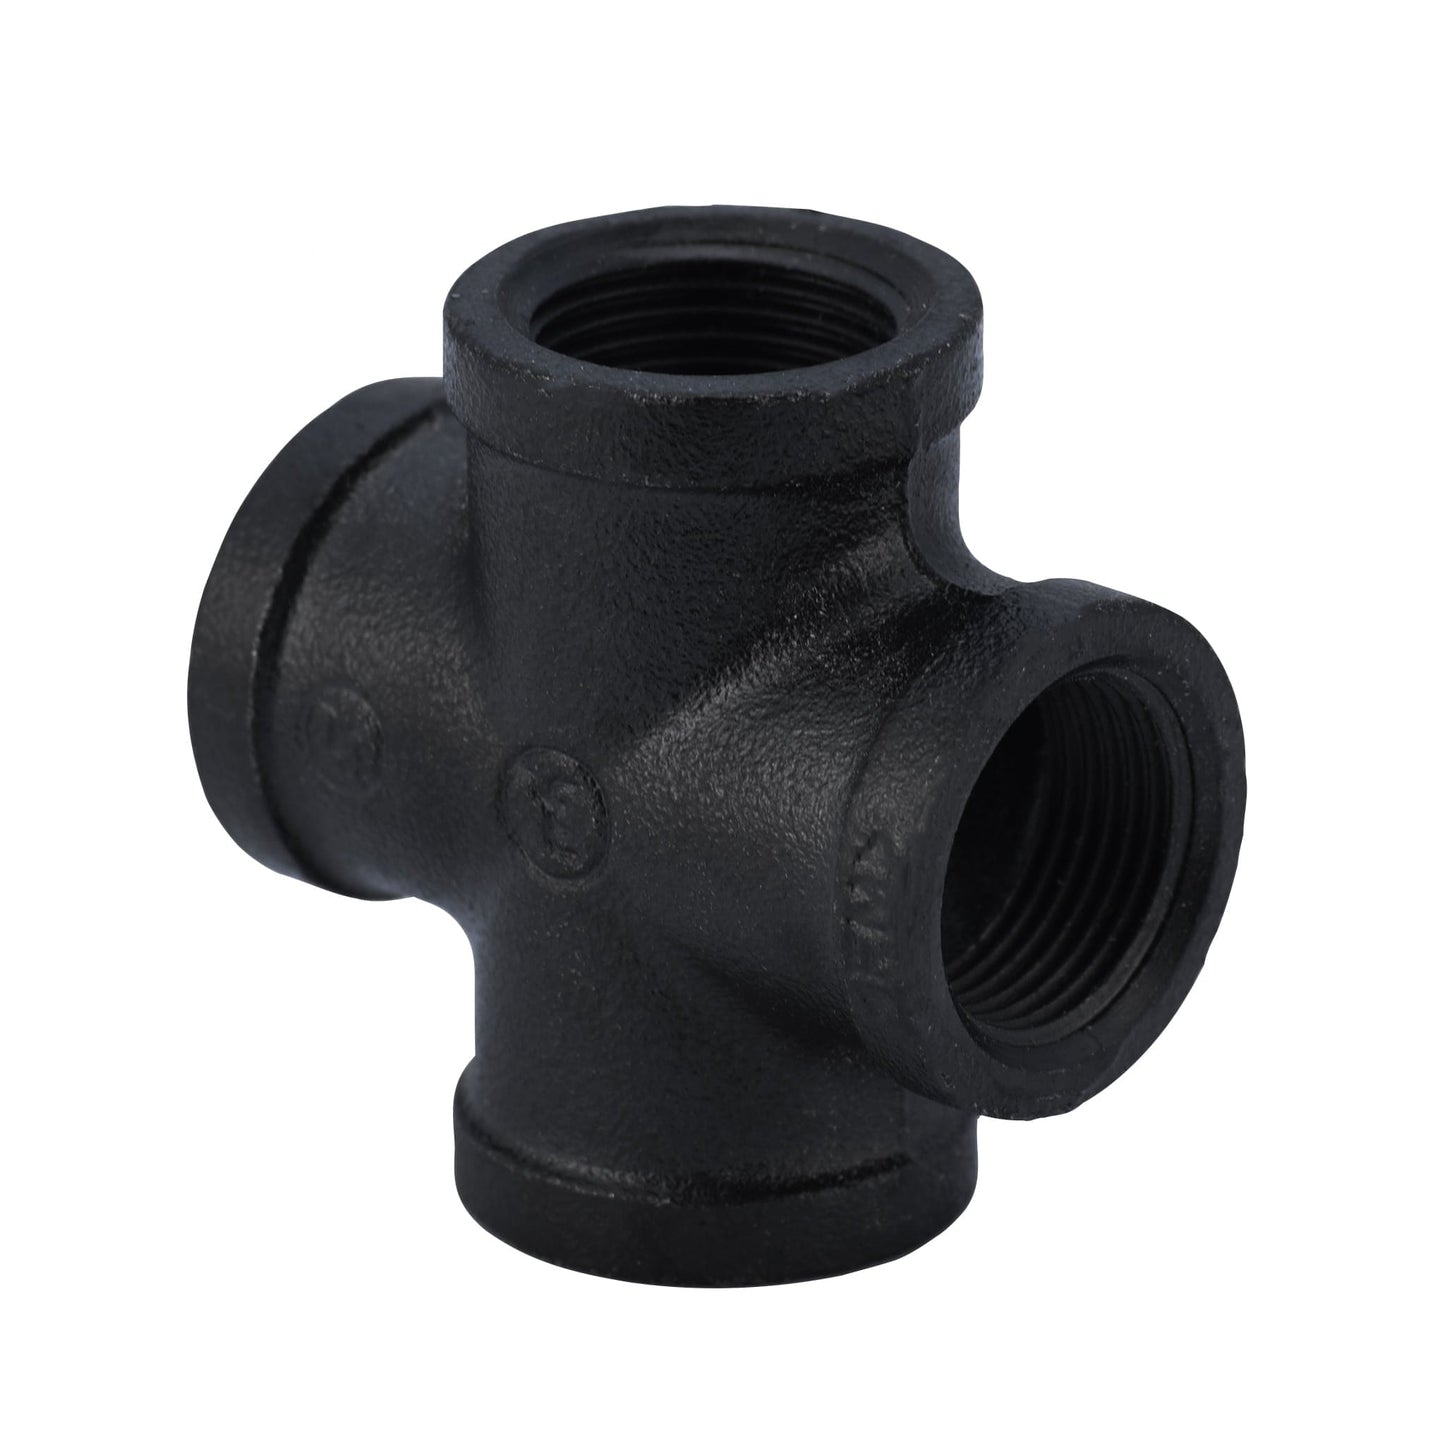 Classic Black Pipe Fittings (20mm)